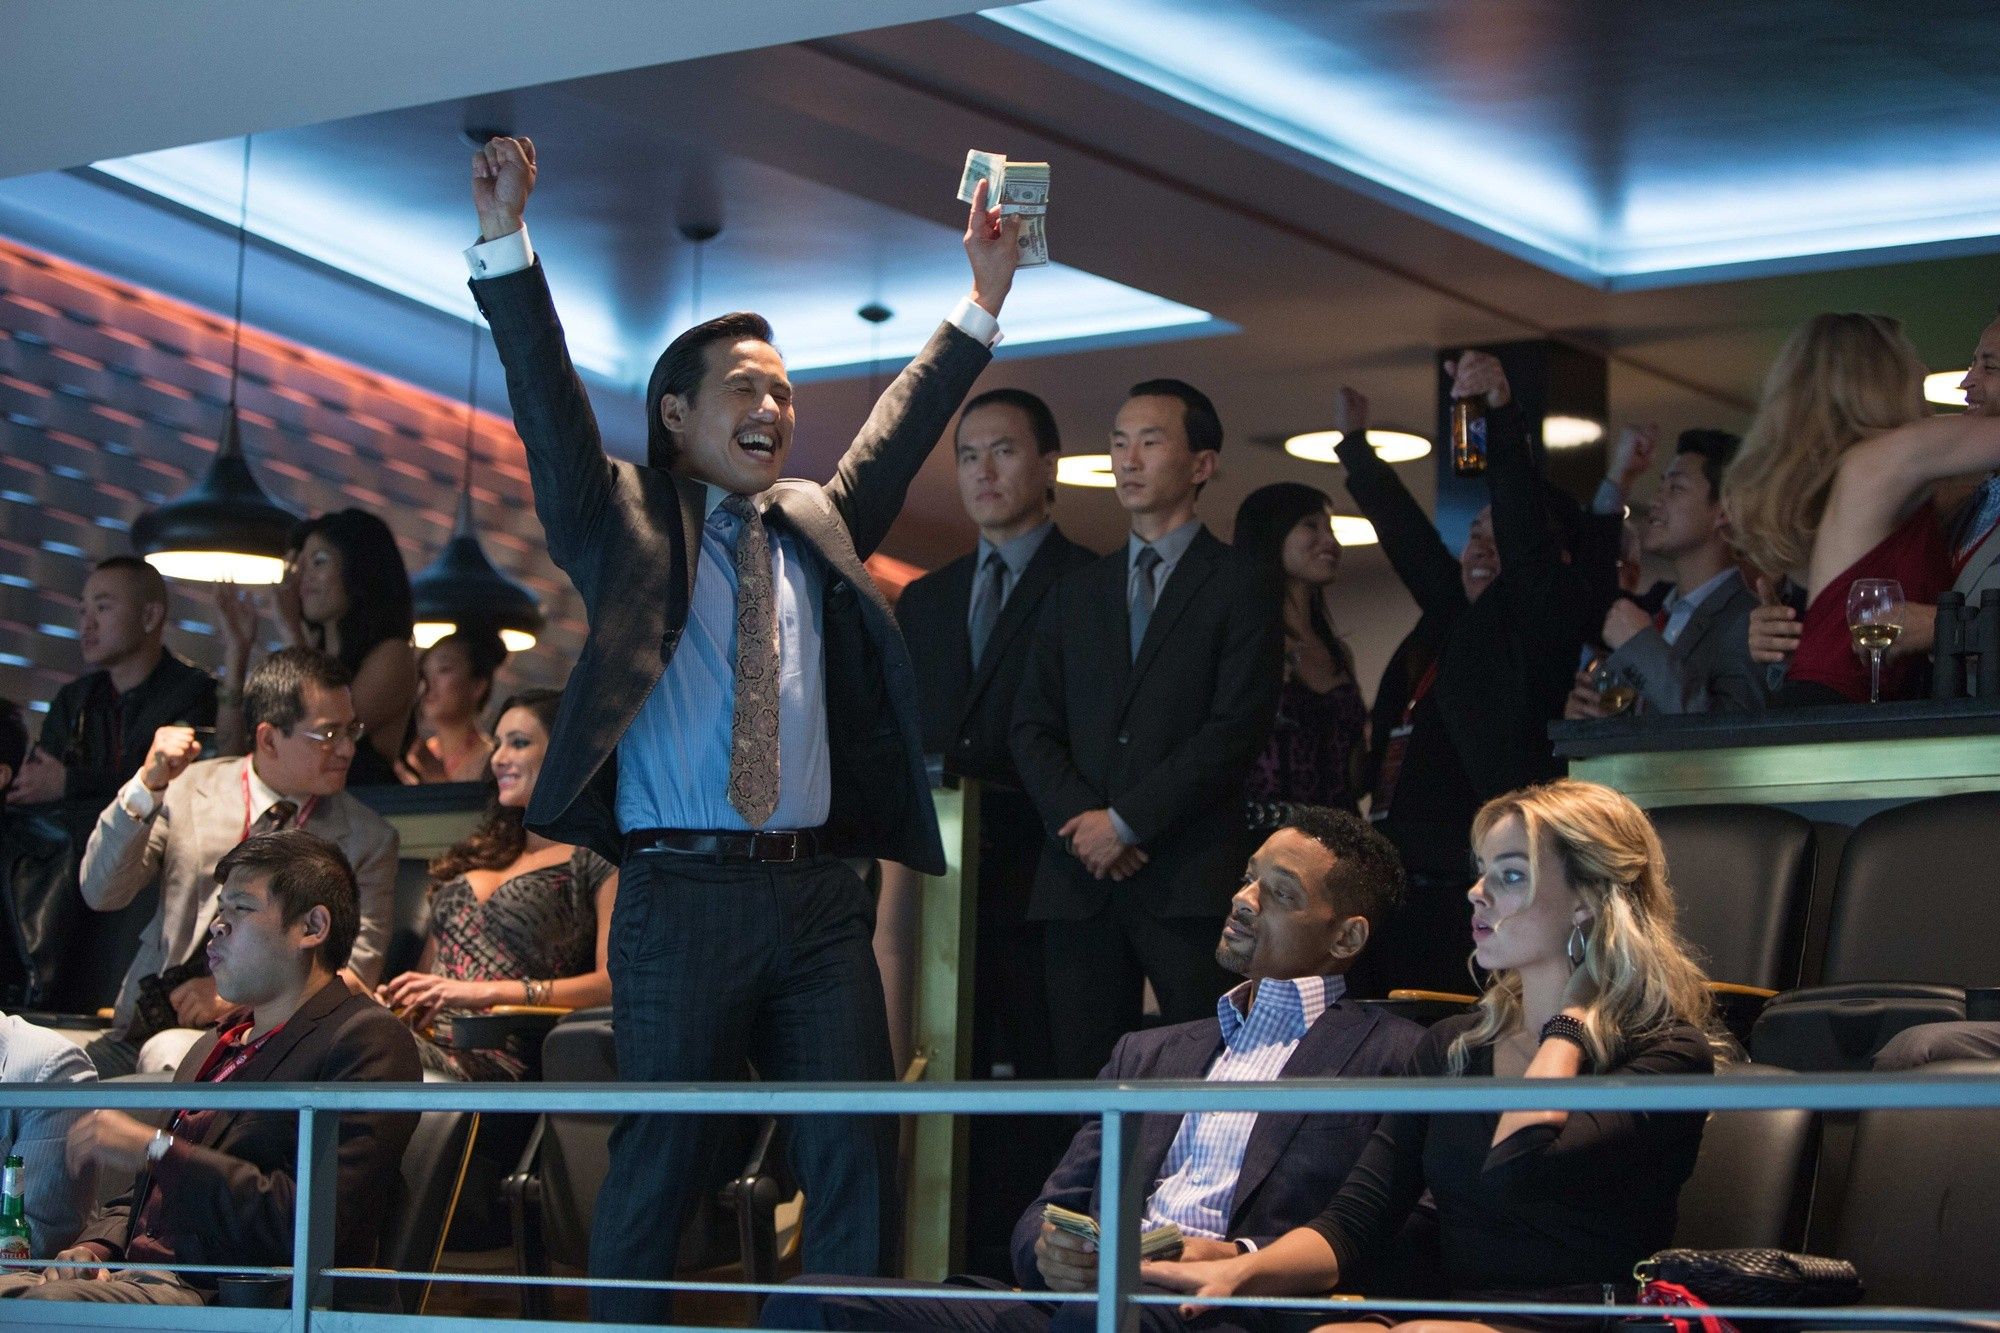 BD Wong, Will Smith and Margot Robbie in Warner Bros. Pictures' Focus (2015)